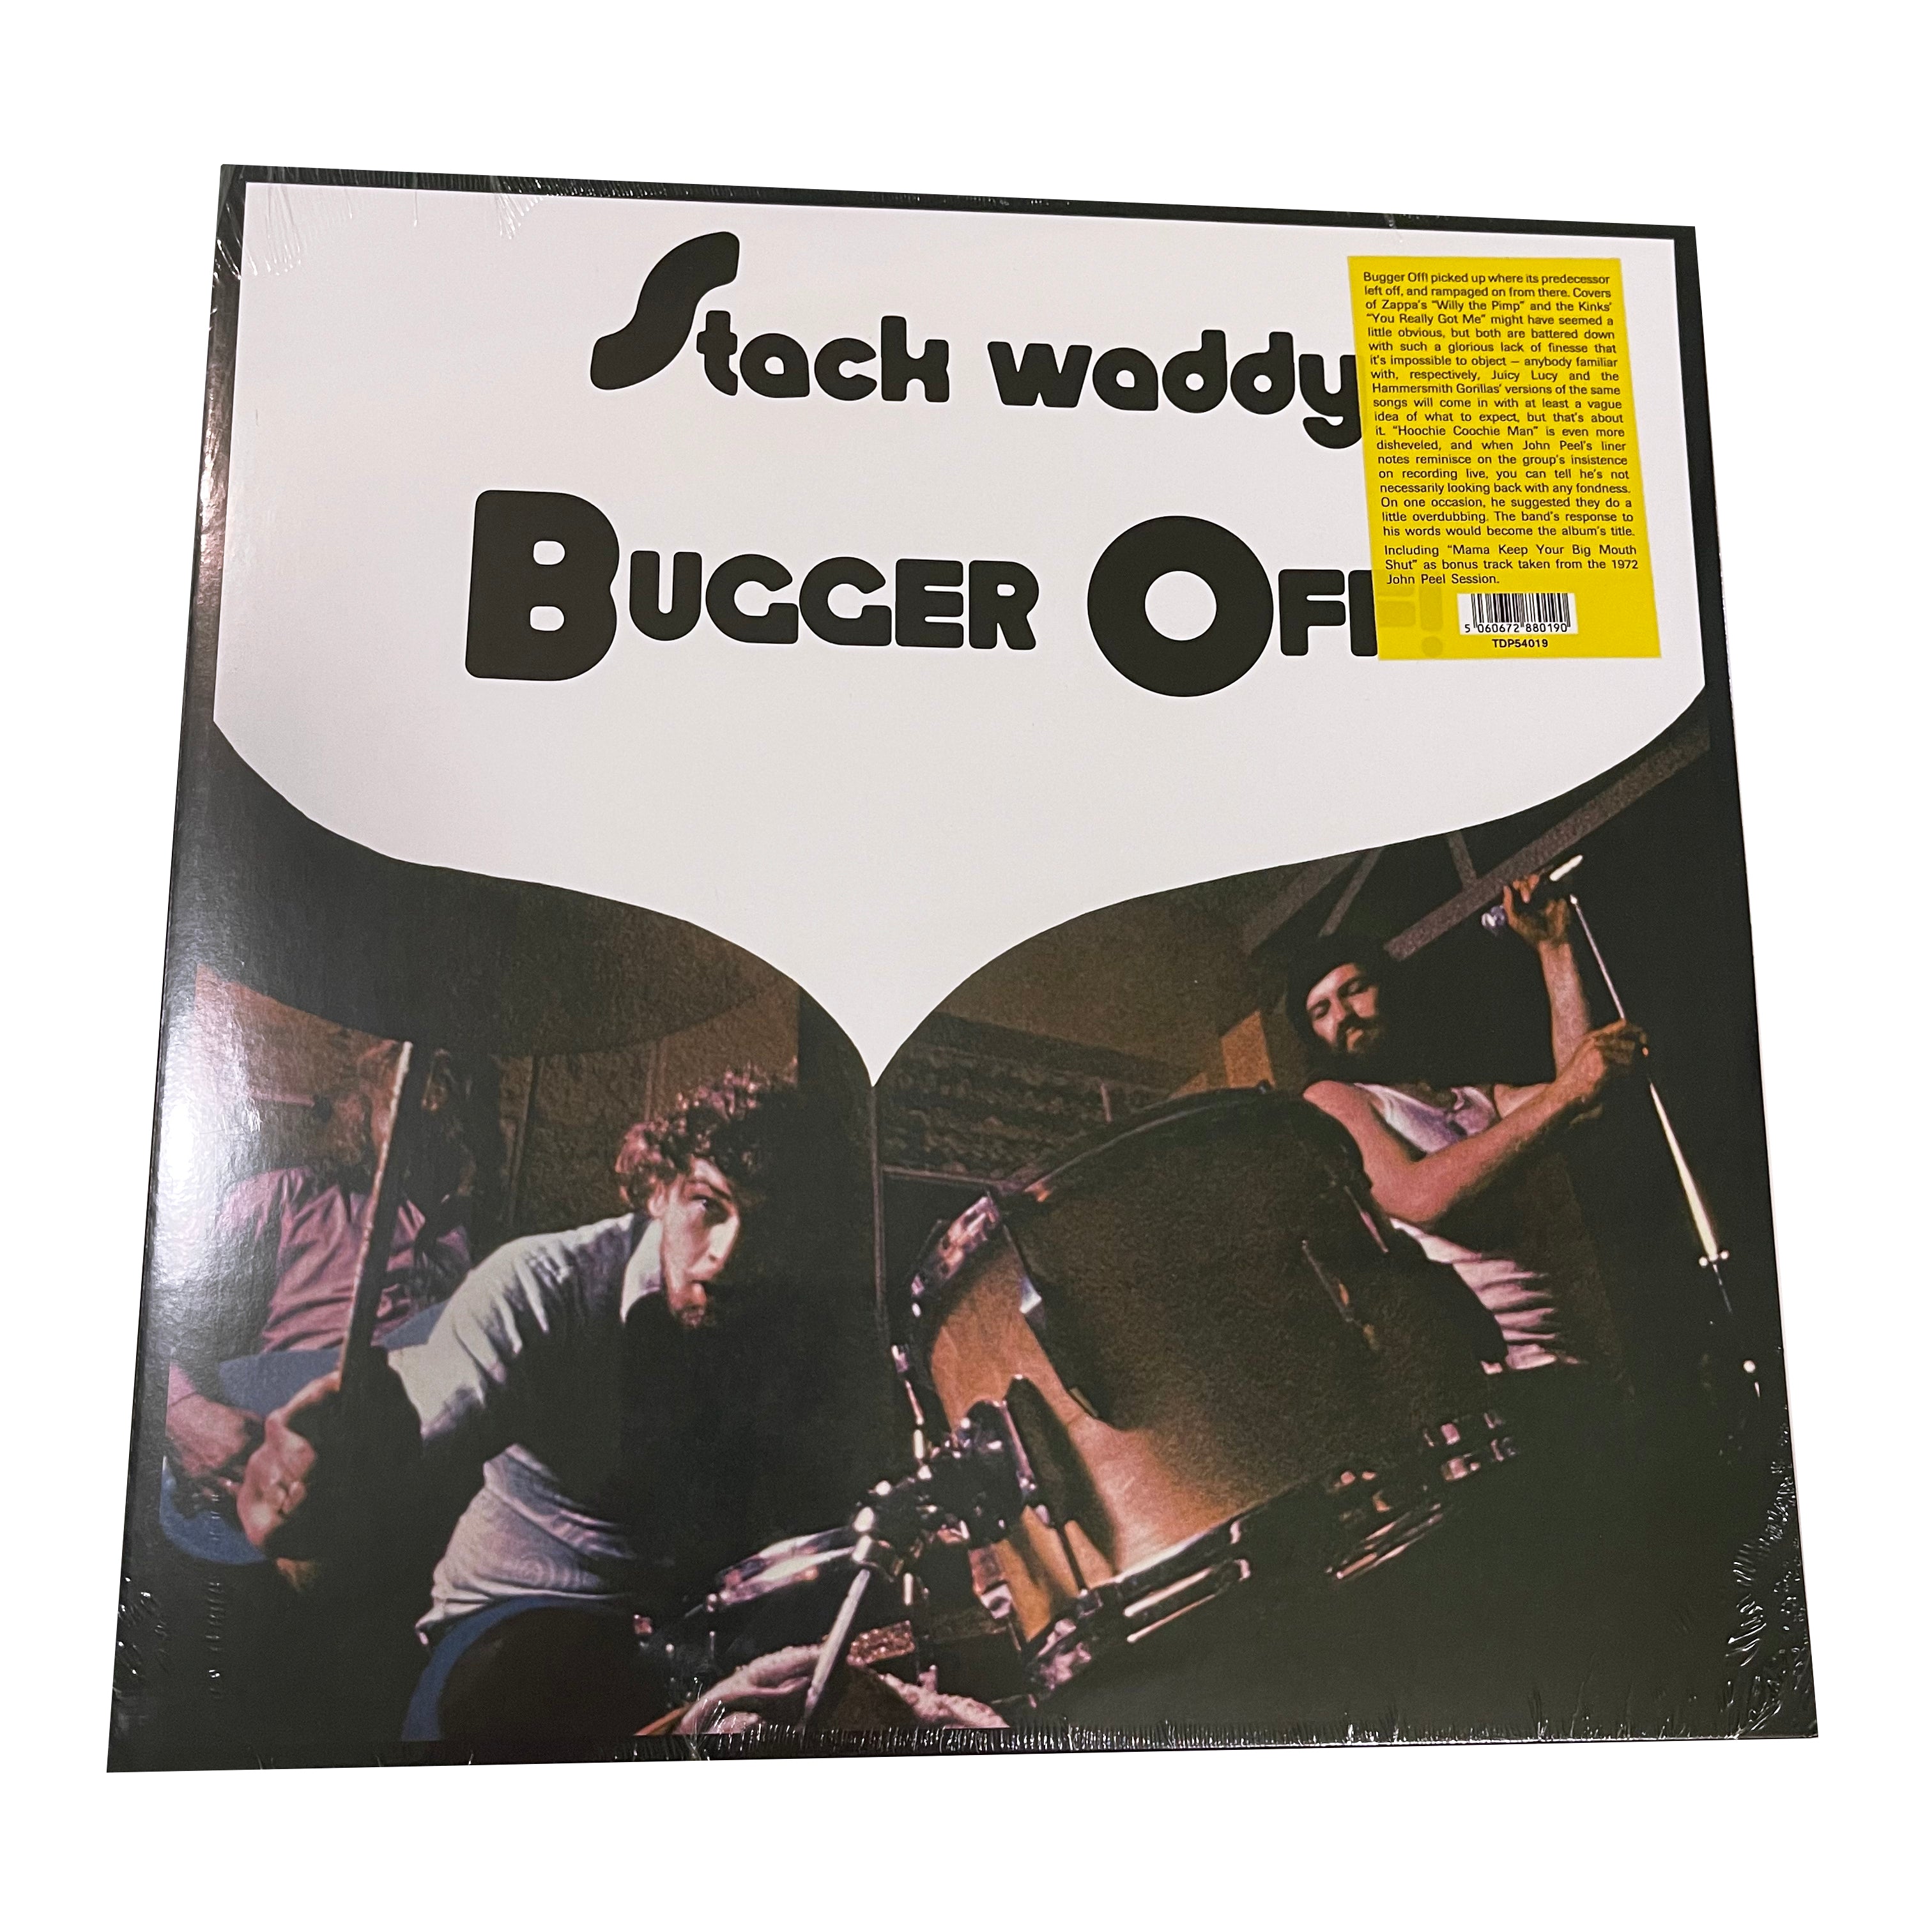 Stack Waddy: Bugger Off 12 – Sorry State Records